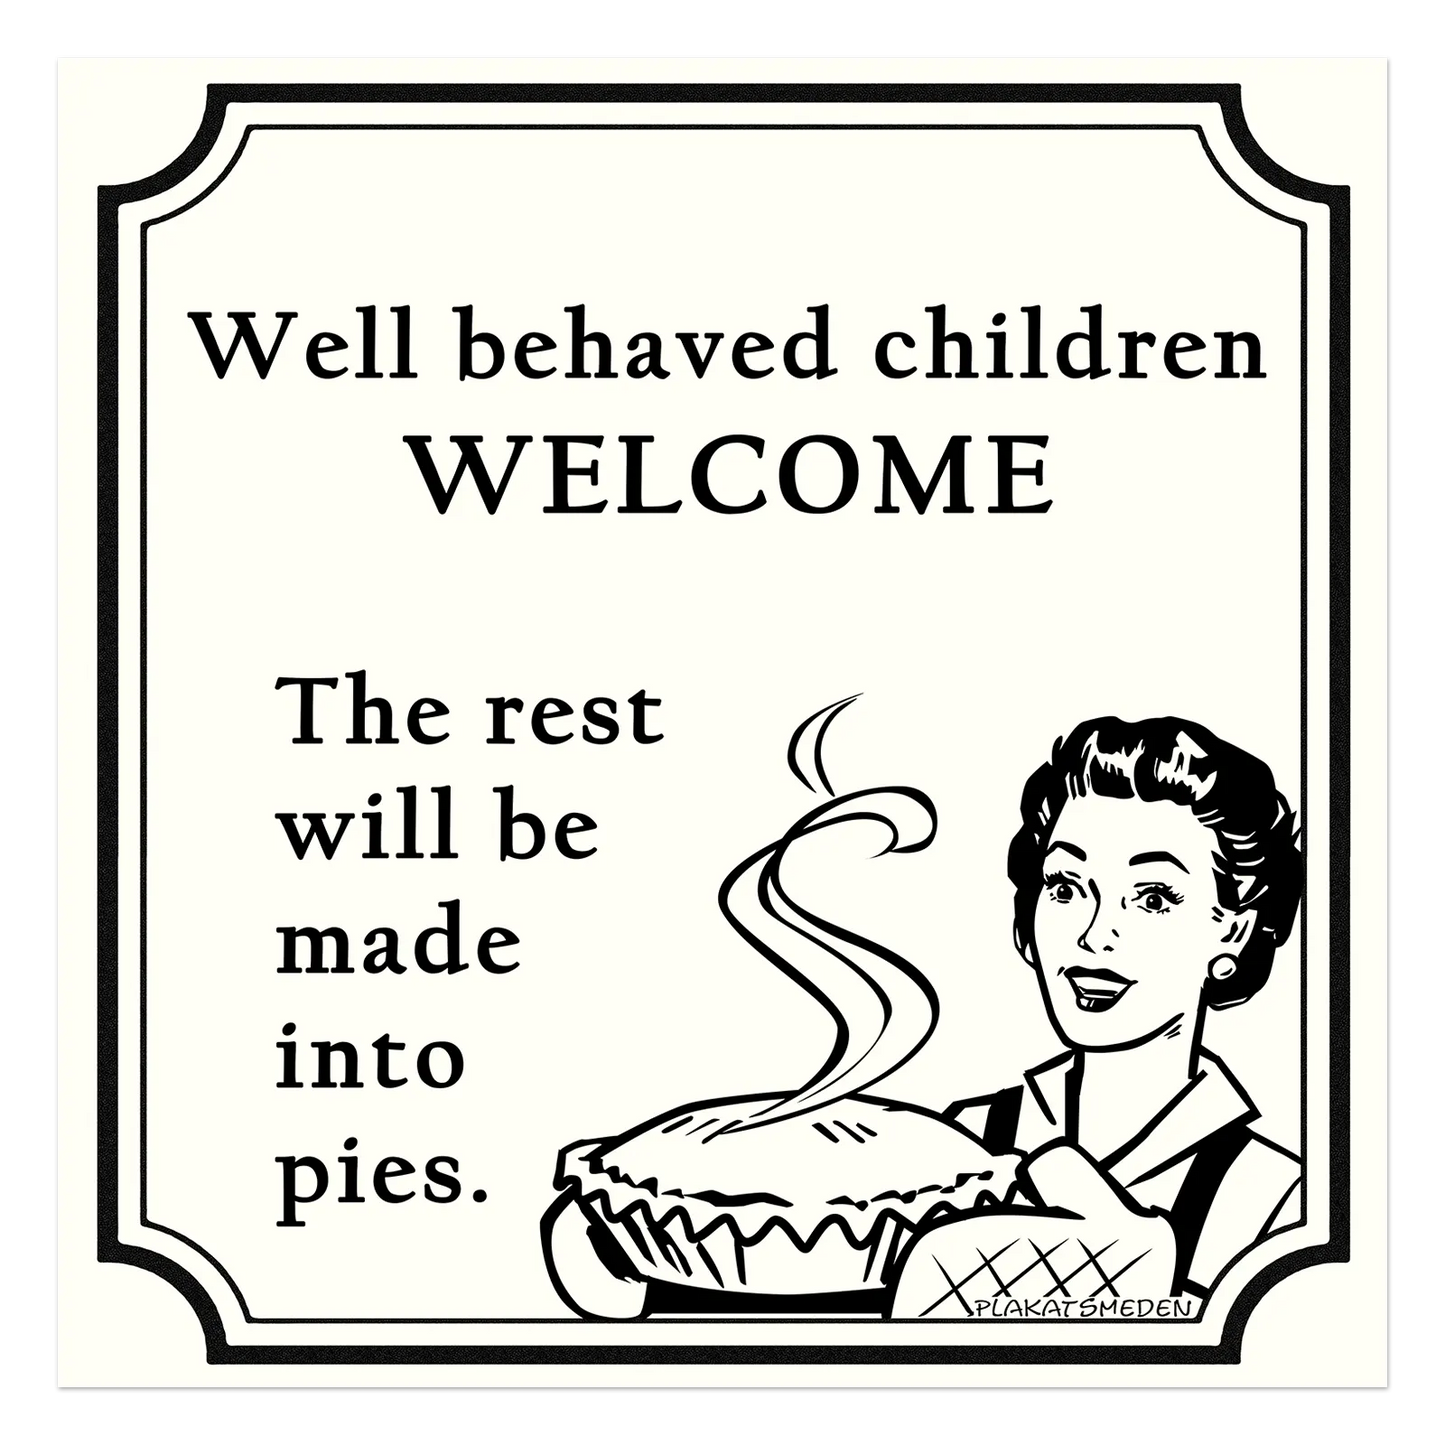 Well behaved children welcome. The rest will be made into pies.